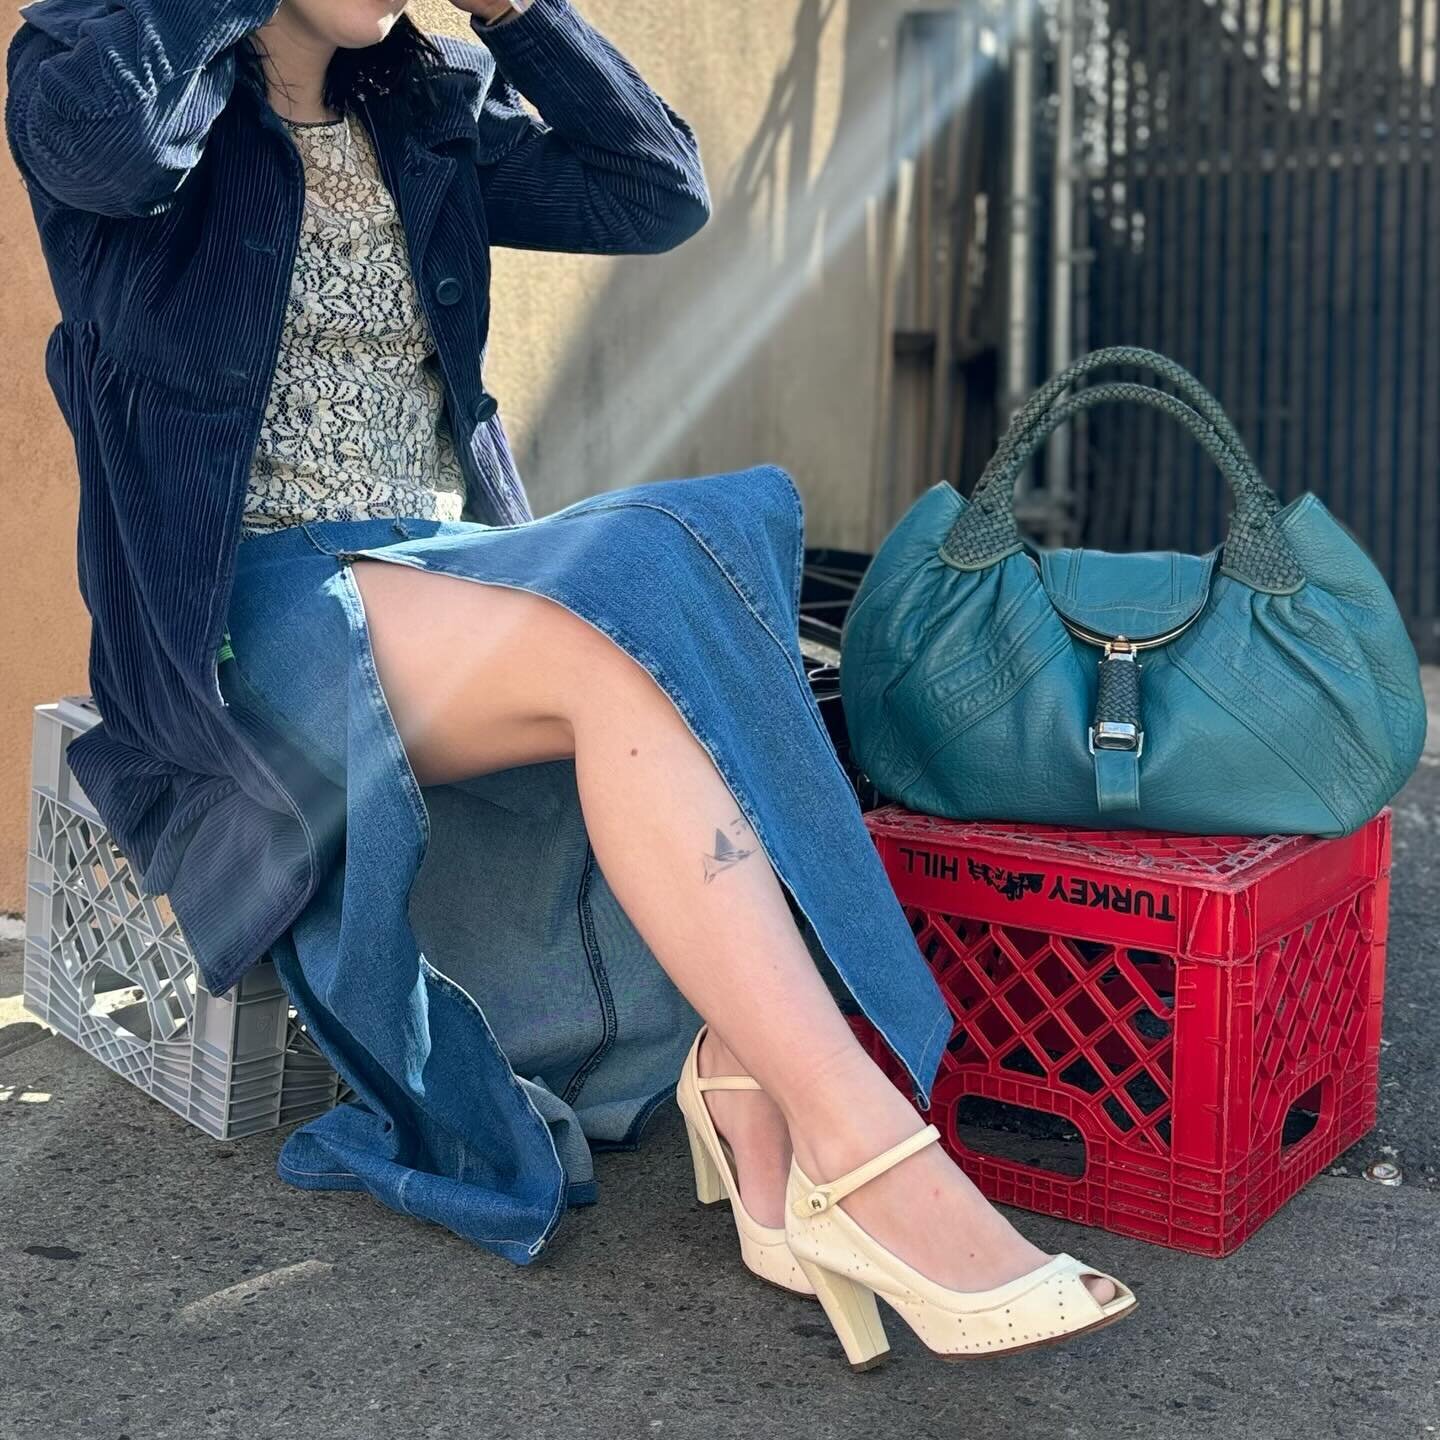 We manifested a blue sky with today&rsquo;s look. Bring these blue beauties home with you &amp; have perfect weather foreverrrr (not actually guaranteed, but you will be very happy!!)

Shop the look -

Designer bag: $700.95

Designer Mary Jane peep t